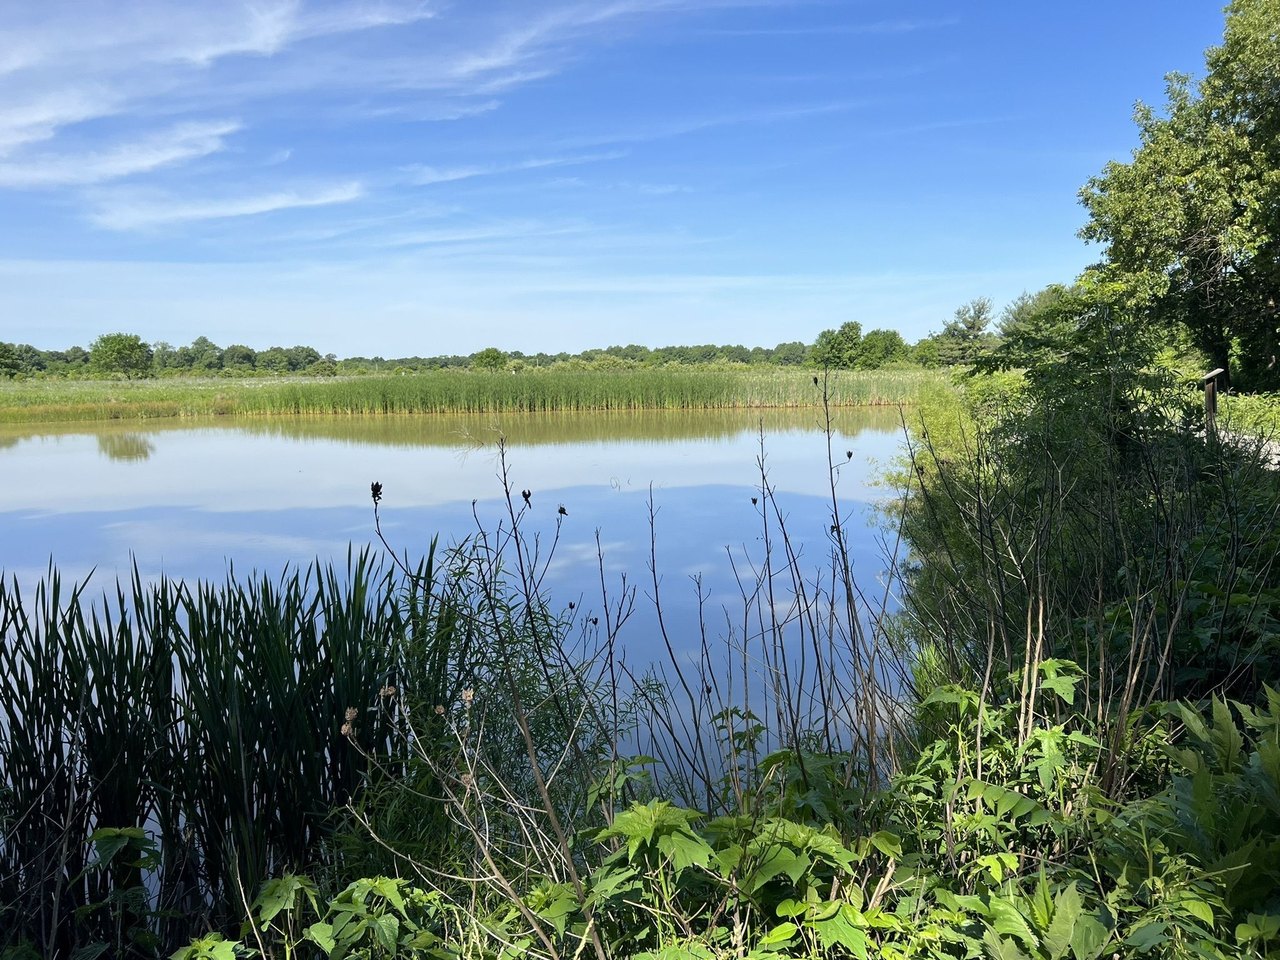  Take An Easy Loop Trail Past Some Of The Prettiest Scenery In Illinois On The Wetland Loop Trail 